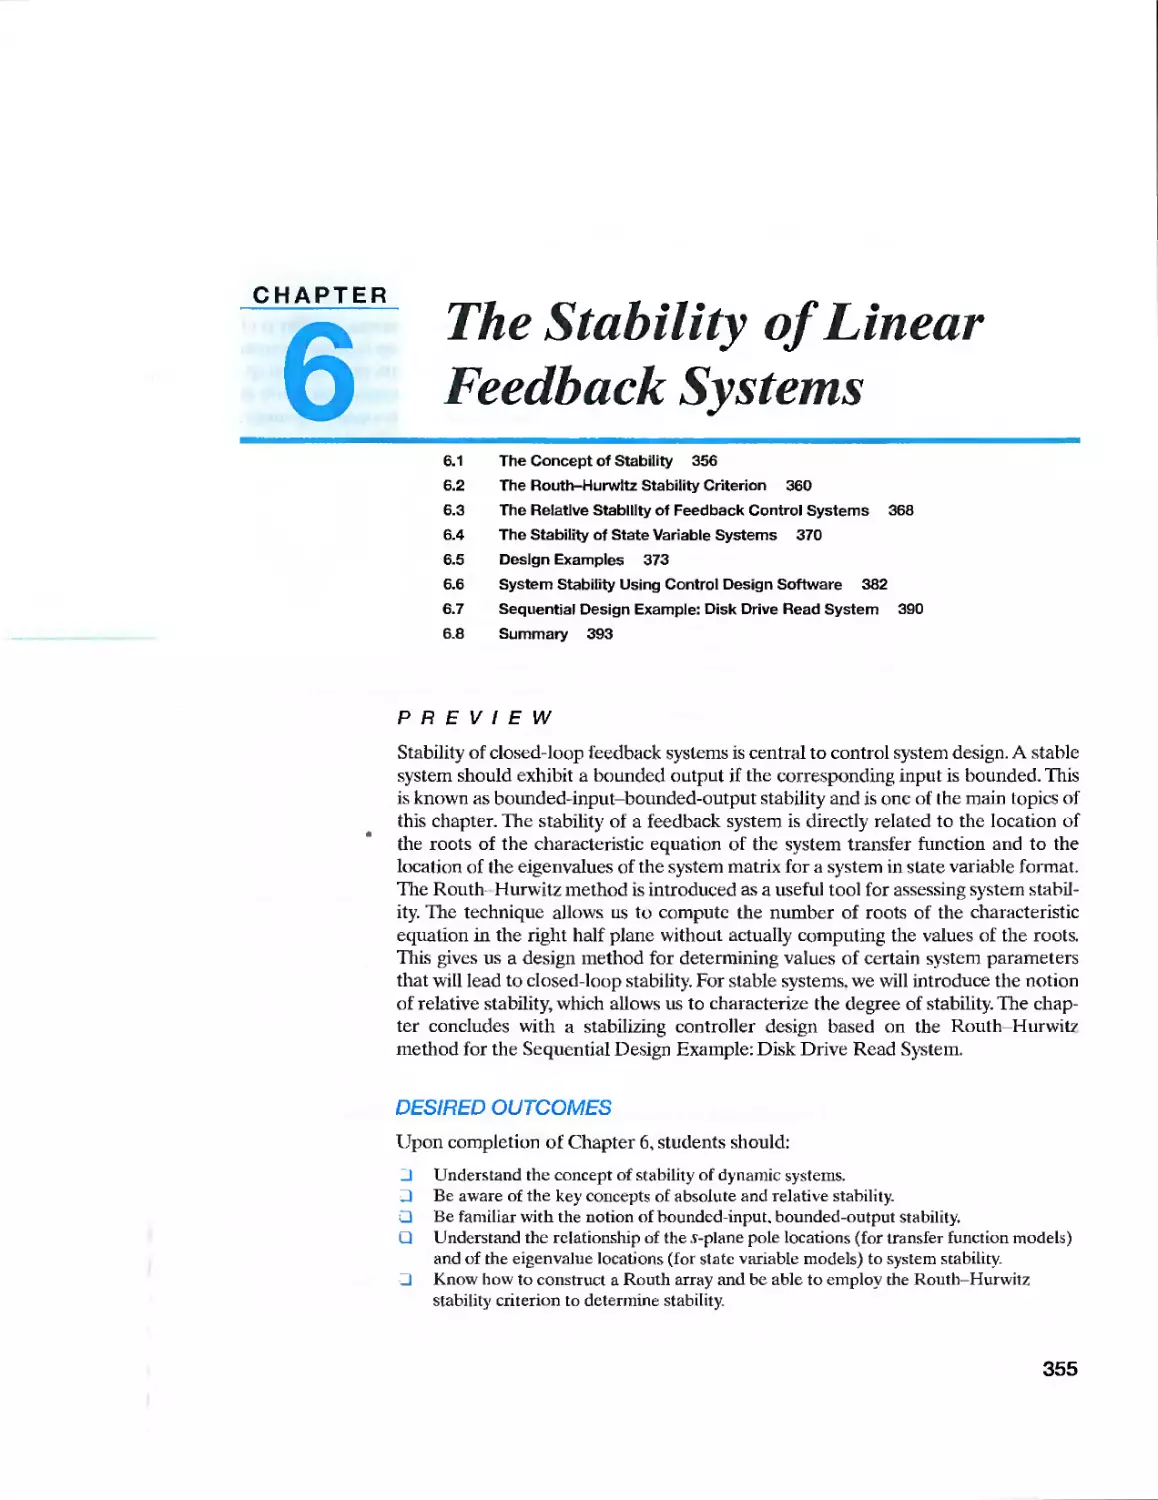 6 The Stability of Linear Feedback Systems